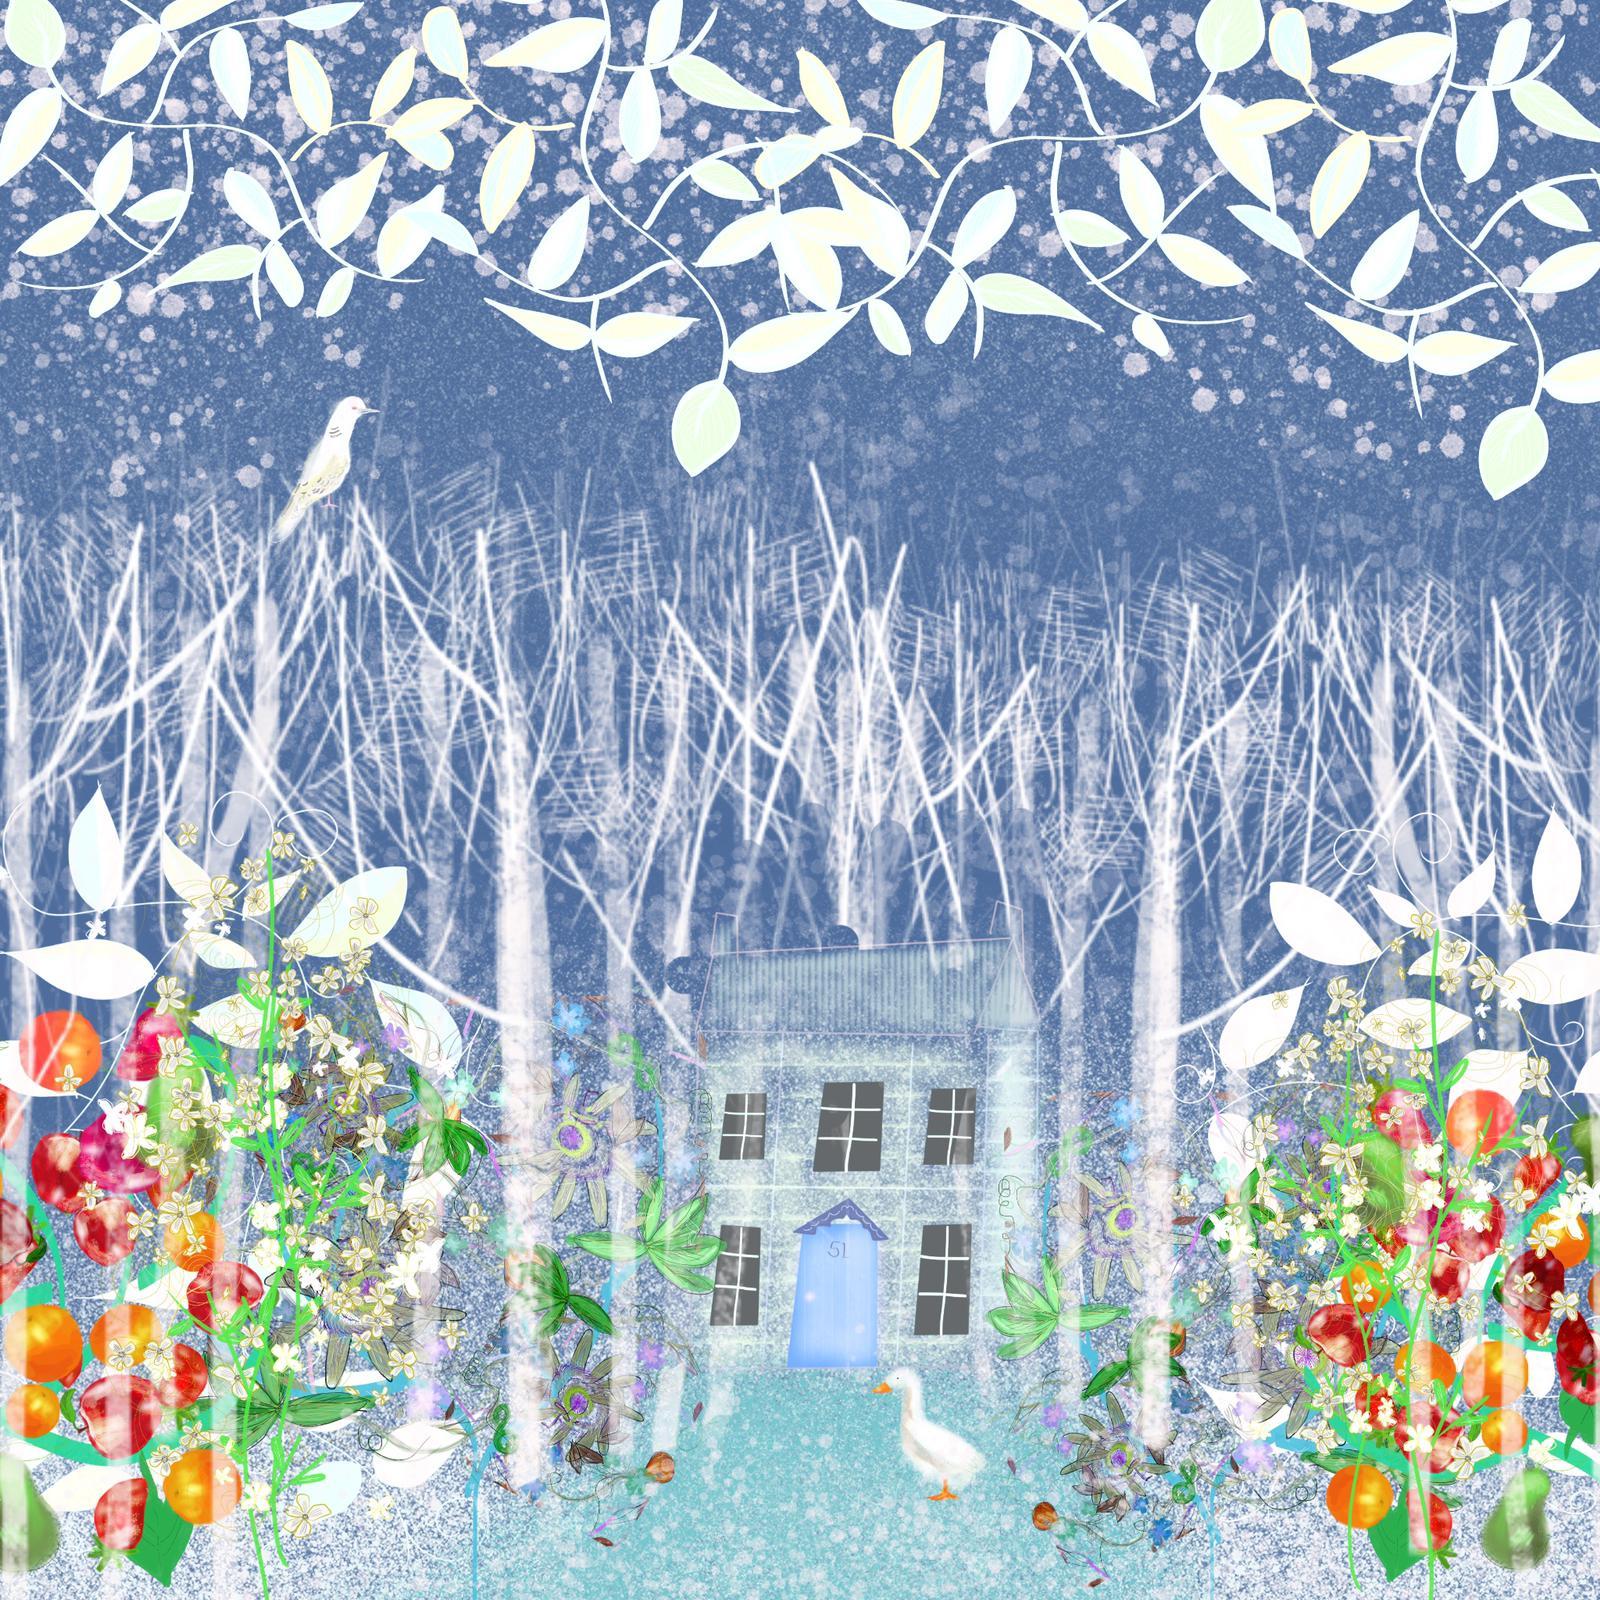 Snow House limited edition print xmas ideas stars dark blue sky signed  - Art by Claire Westwood